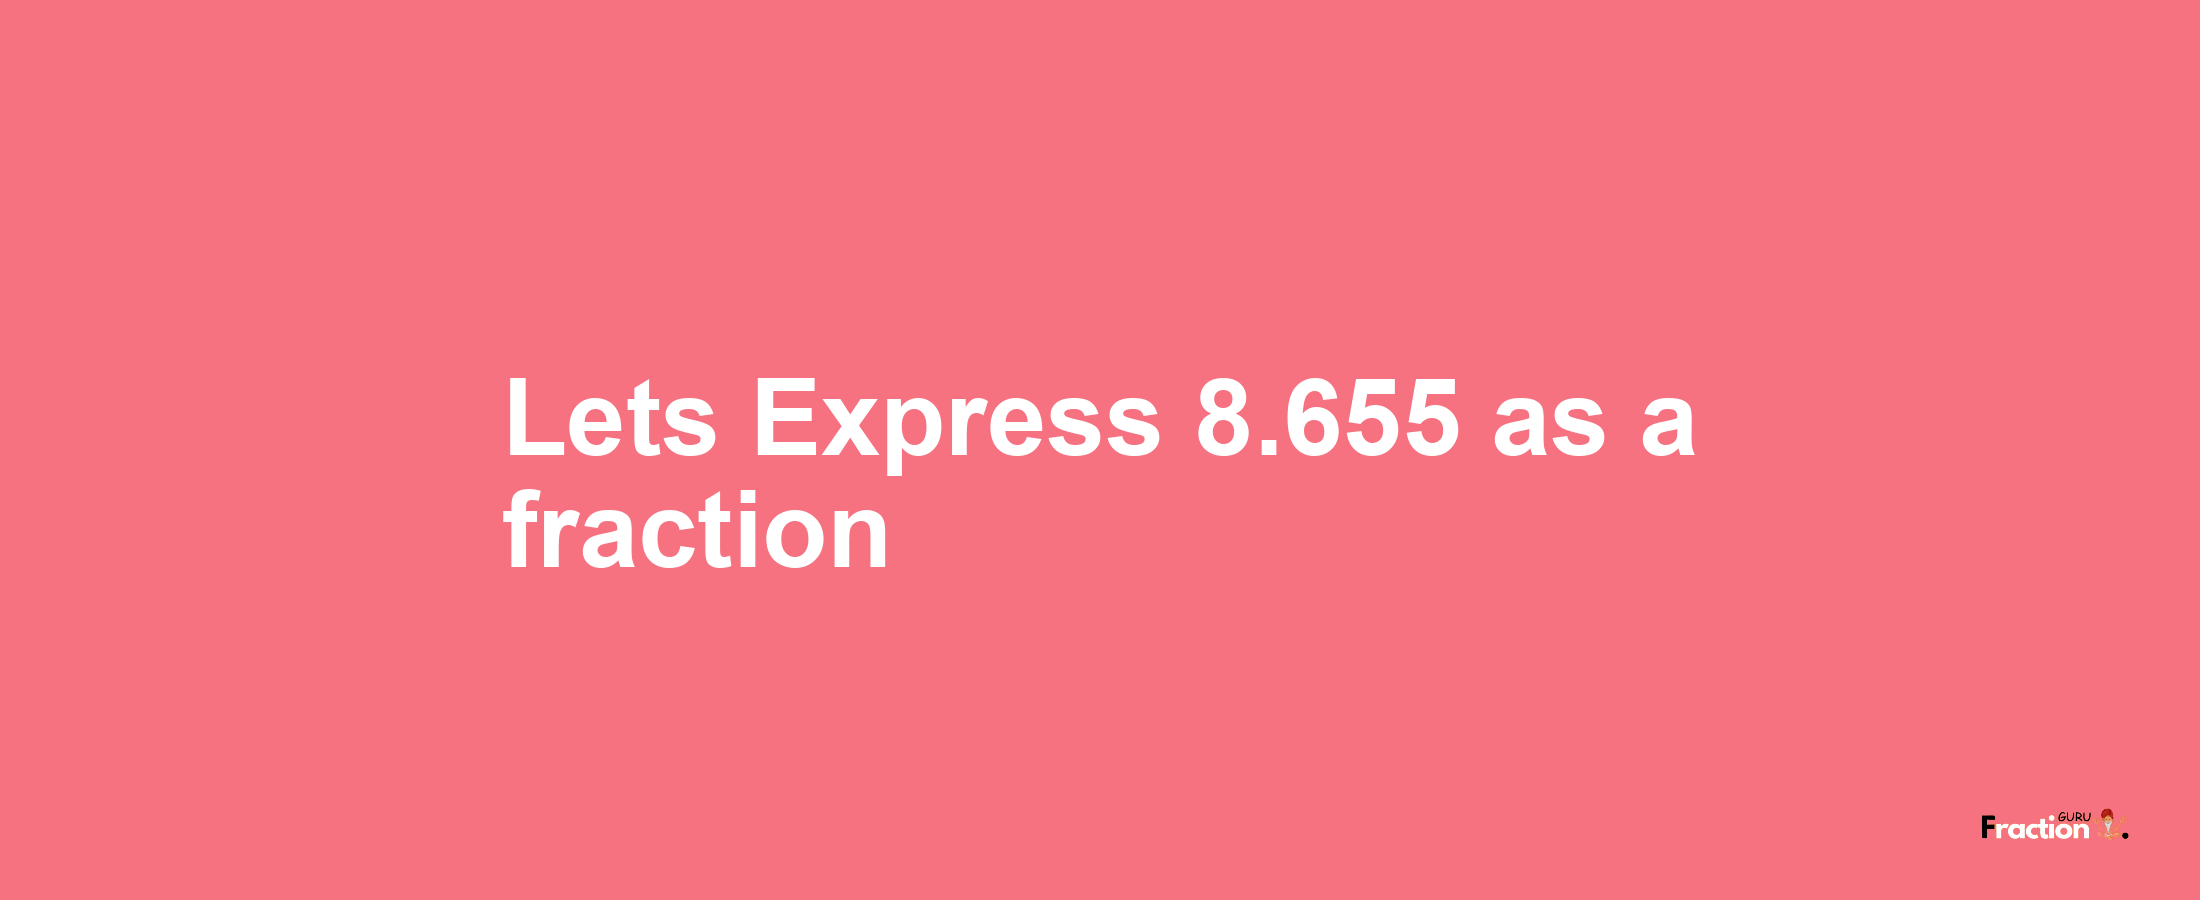 Lets Express 8.655 as afraction